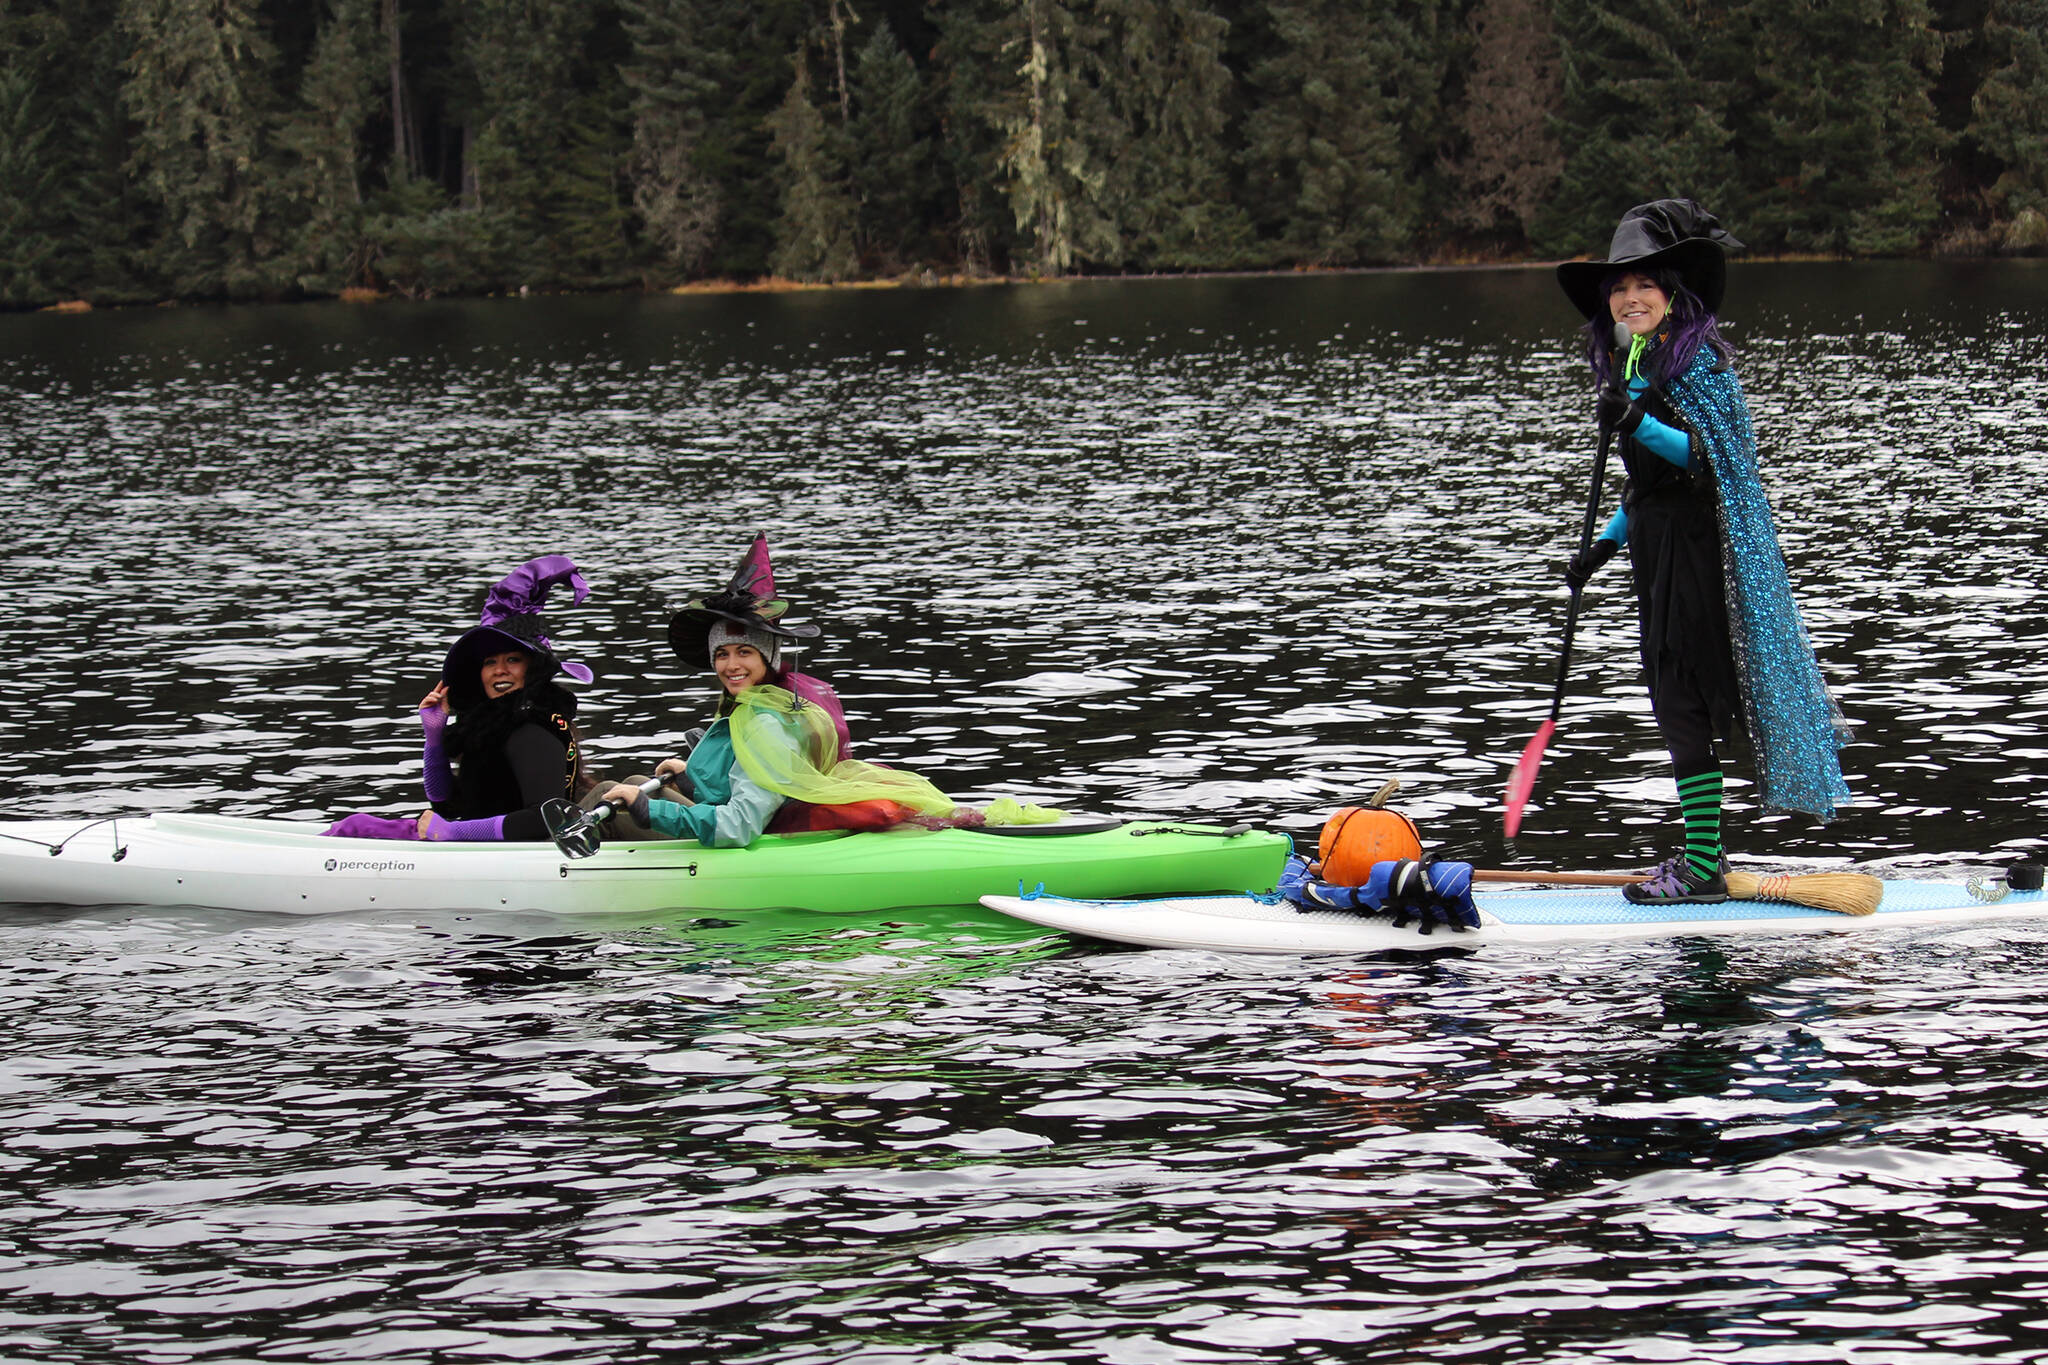 Marisol Elizarraras, left, Kira Shollenberger, center, and Bev O’Brien, right, take part in the first Witches Paddle on Auke Lake on Saturday, Oct. 30. (Dana Zigmund/Juneau Empire)